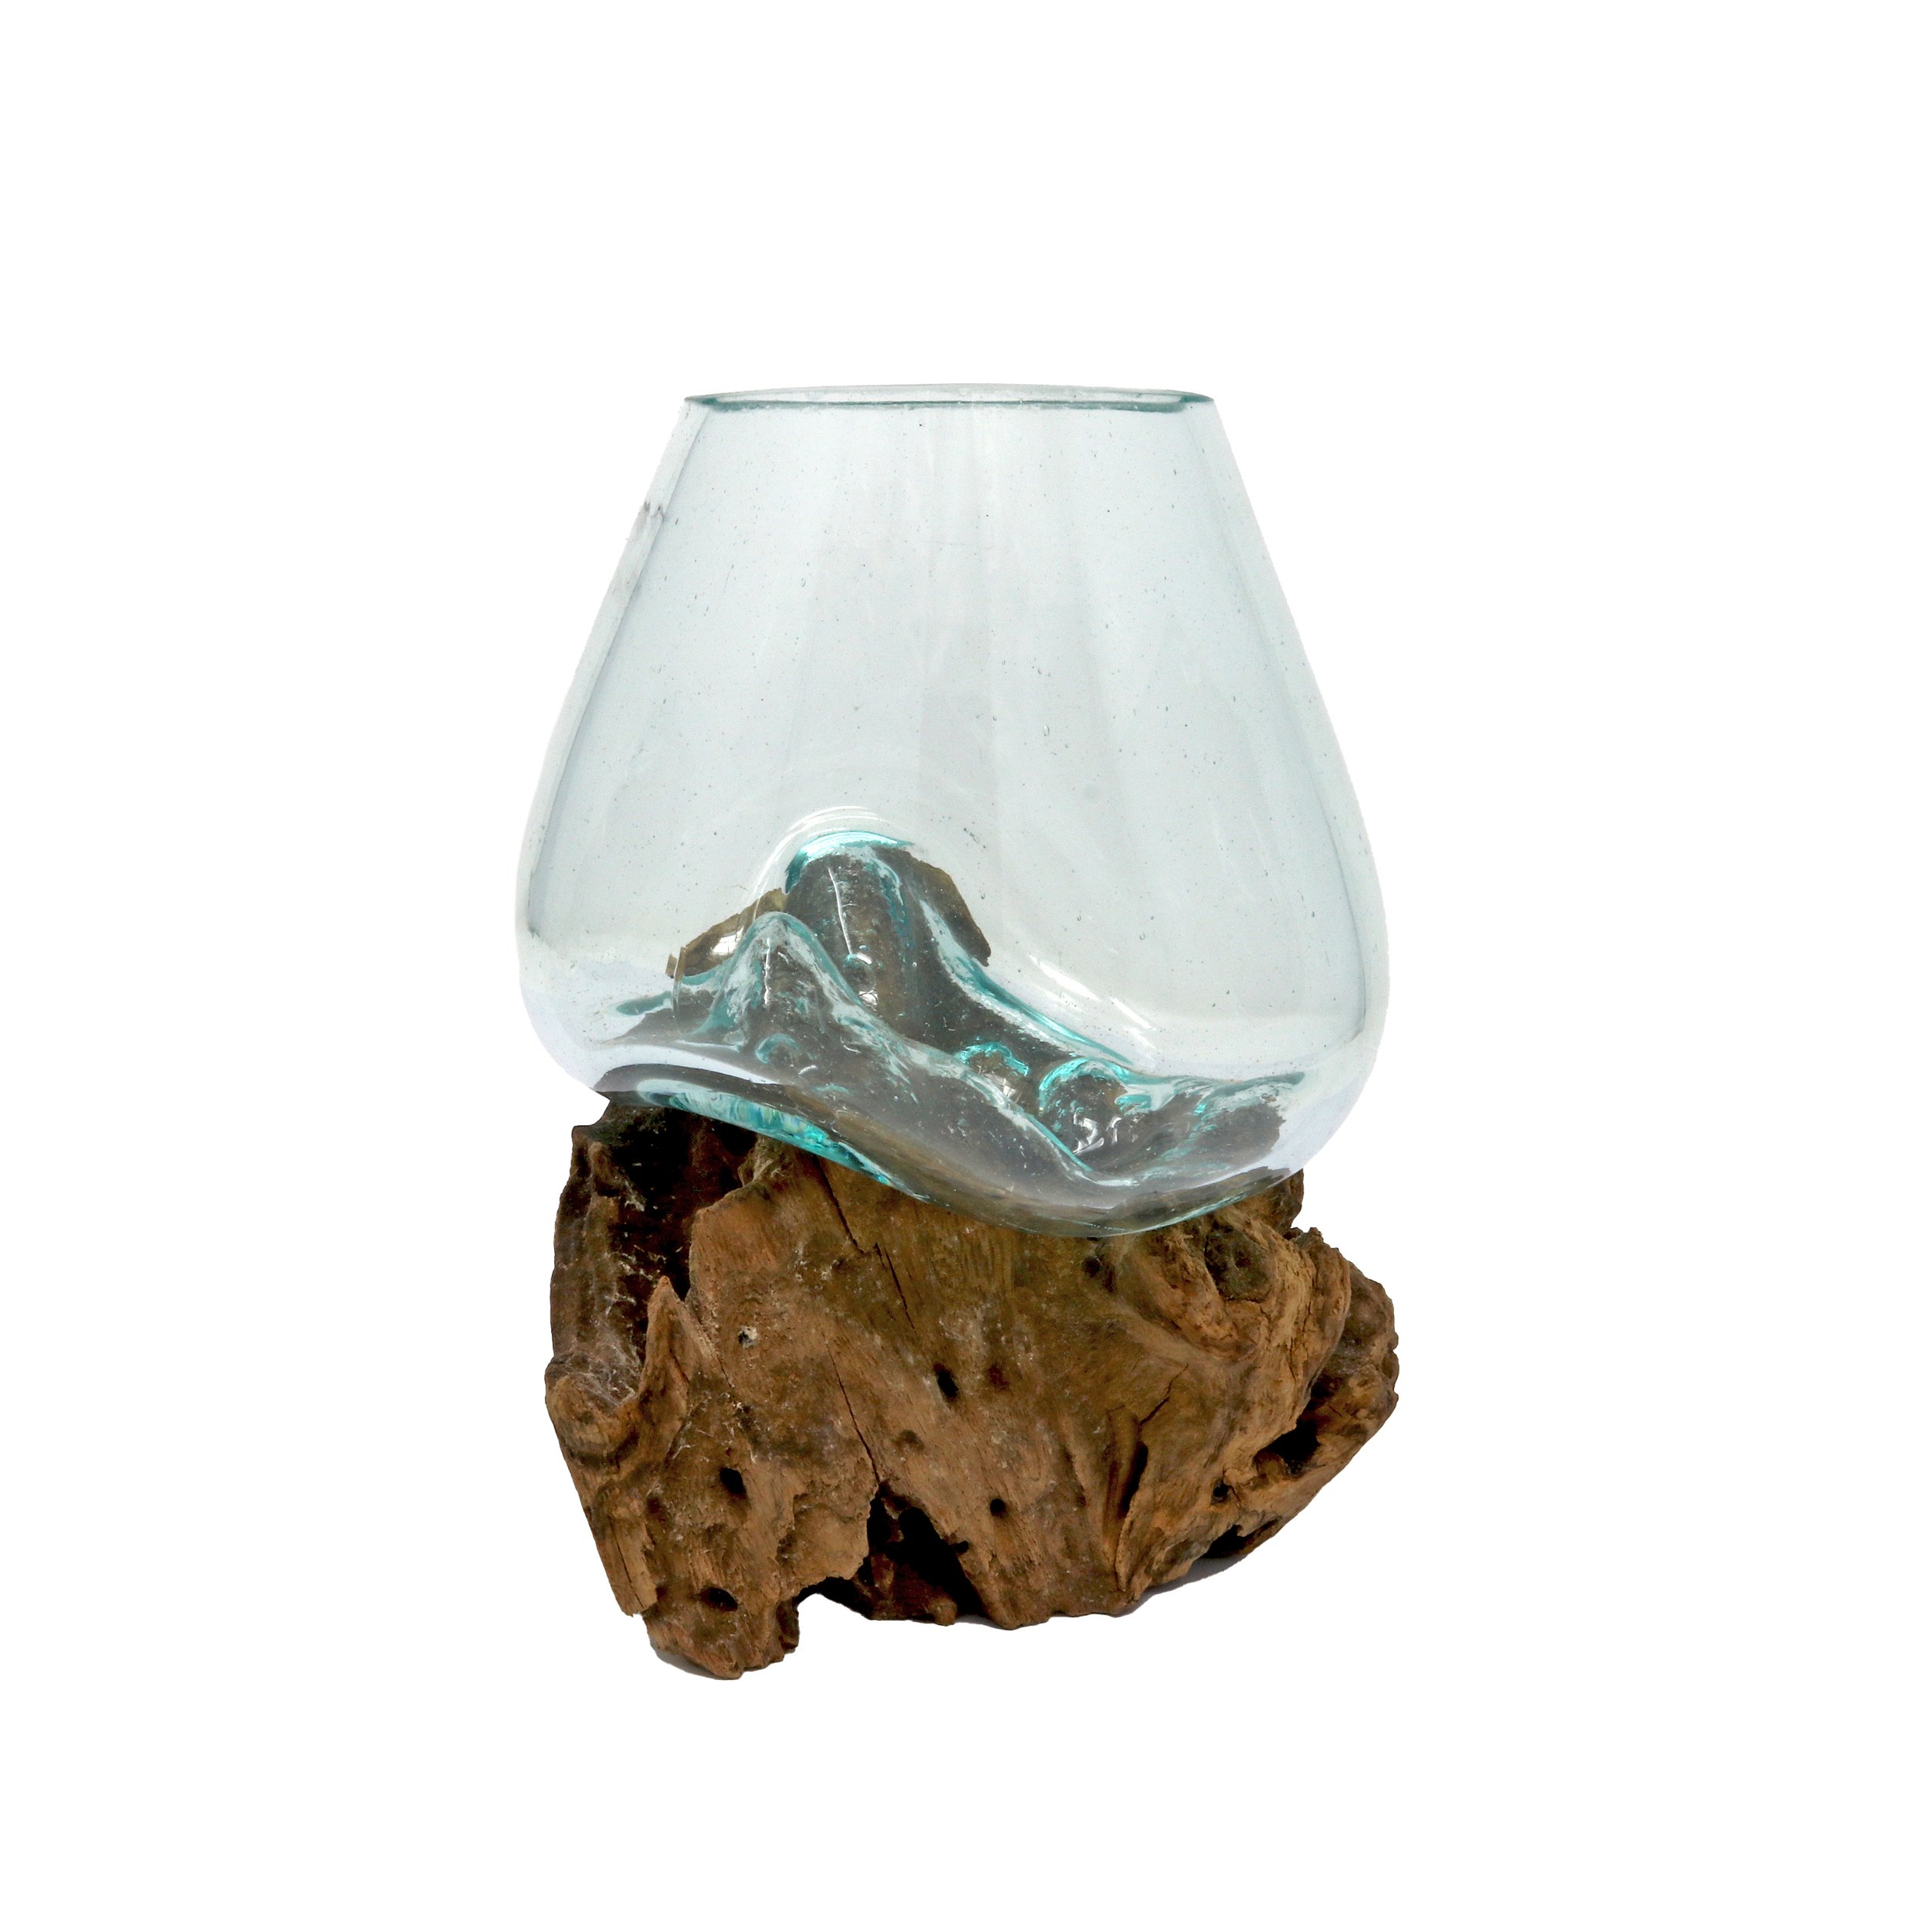 Glass Vase Melted Over Wood Log -Extra Small